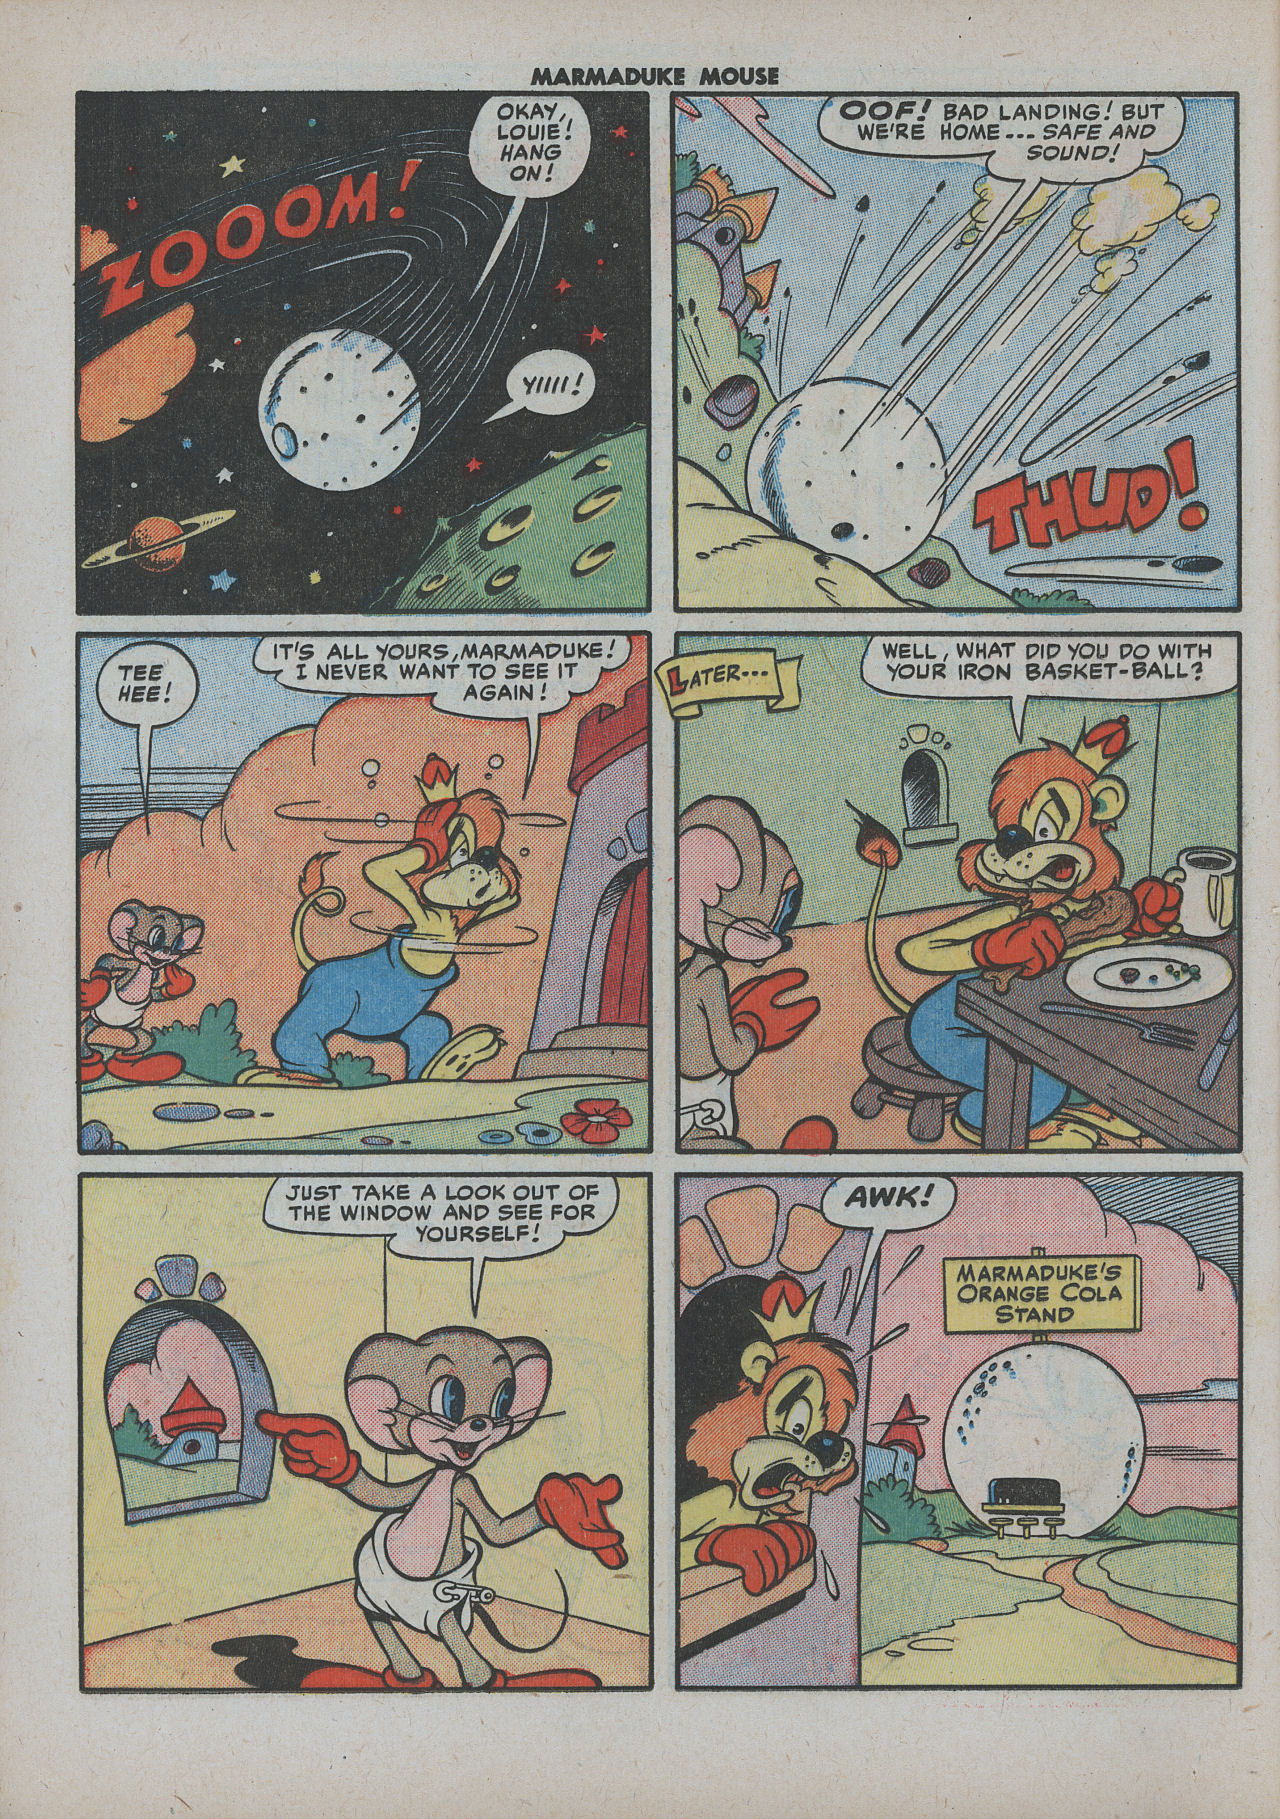 Read online Marmaduke Mouse comic -  Issue #24 - 20